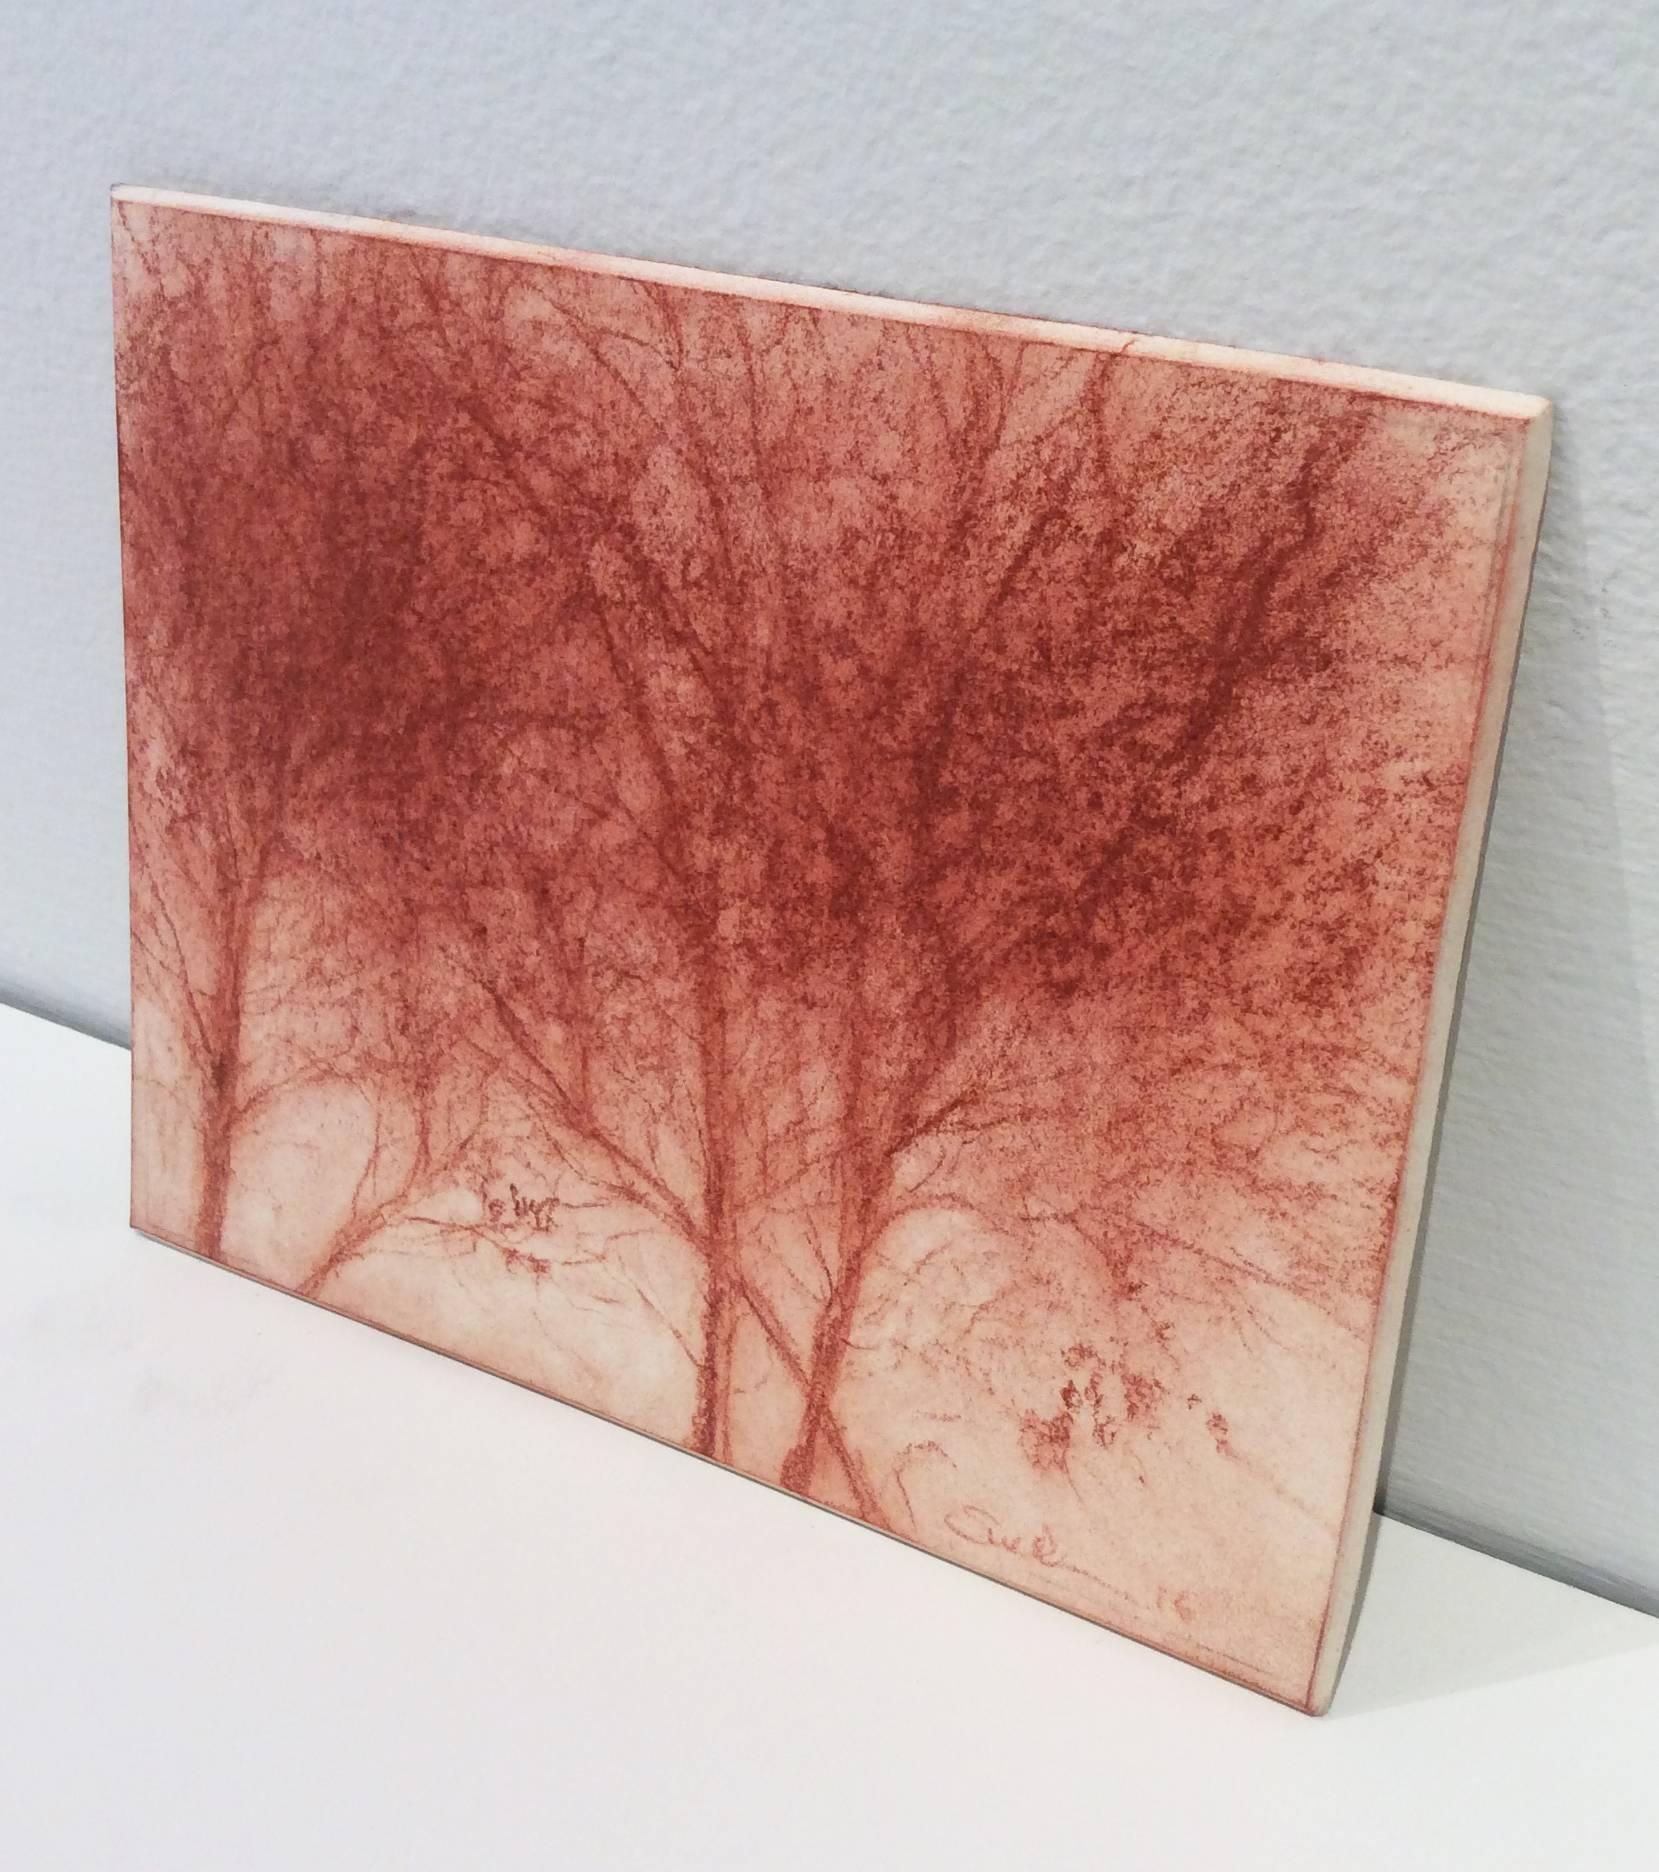 Red Trees 2 (Modern, Realistic Red Sanguine Chalk Drawing of Trees in Landscape) - Art by Sue Bryan